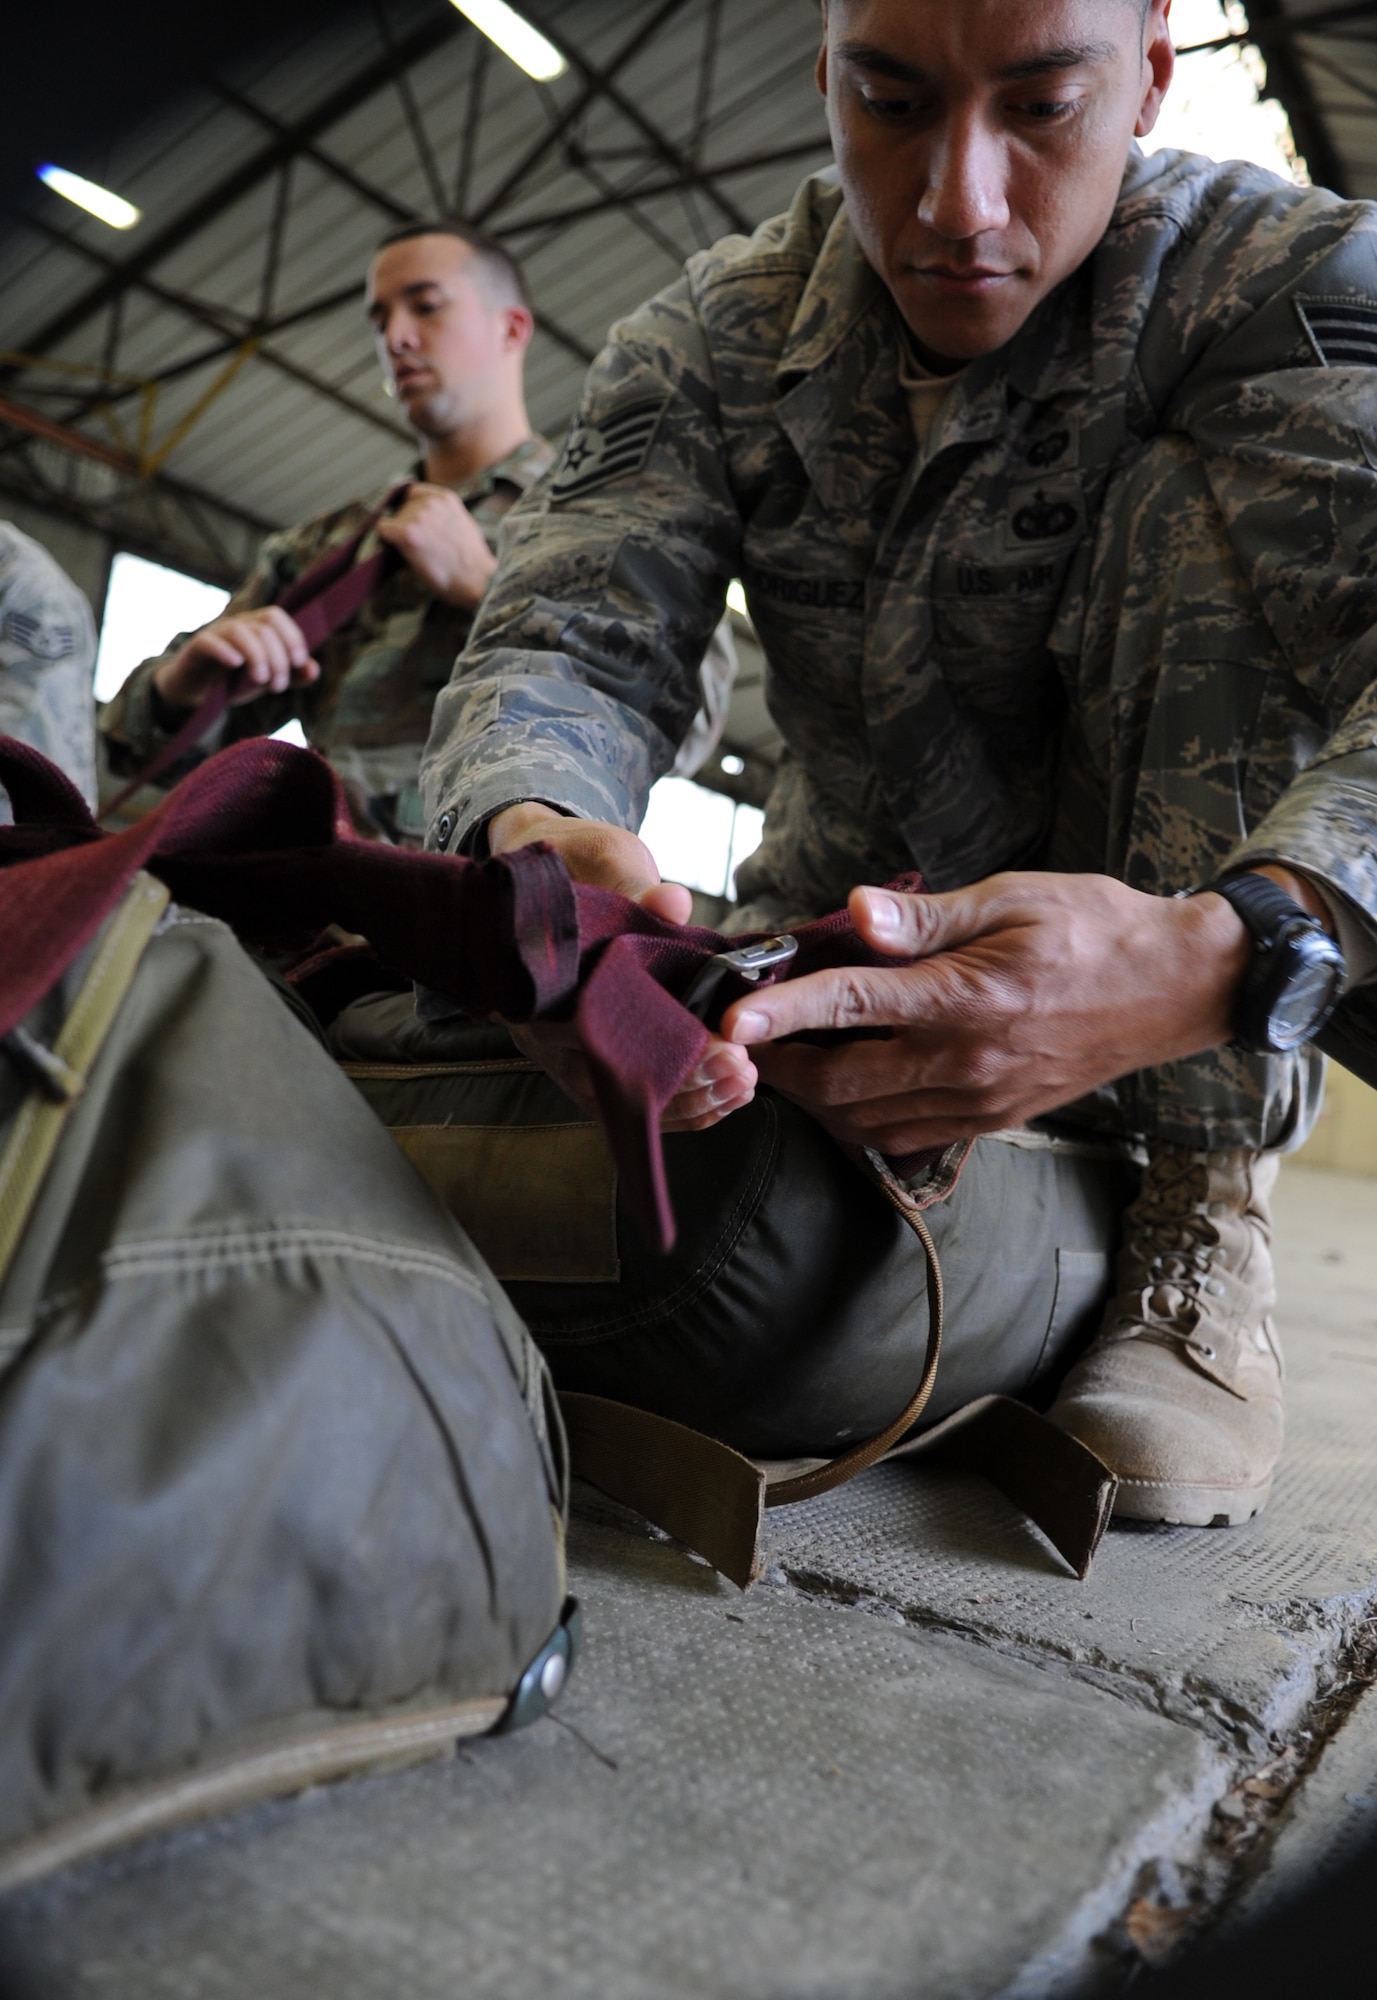 U.S. Air Force Staff Sgt. Gabriel Rodriguez, with the 435th Security Forces Squadron, prepares a chute for a static jump during a pre-jump training at École des troupes aéroportées (ETAP) Pau, France, March 3, 2010. Members of the 435th Contingency Response Group and the 5th Quartermaster Company joined with their French military counterparts for a week of training at the École des troupes aéroportées (ETAP), or School of Airborne Troops, a military school dedicated to training the military paratroopers  the French army, located in the town of Pau, in the département of Pyrénées-Atlantiques, France.  The ETAP is responsible for training paratroopers, and for international cooperation and promotion of paratroop culture. (U.S. Air Force photo by Airman 1st Class Caleb Pierce)